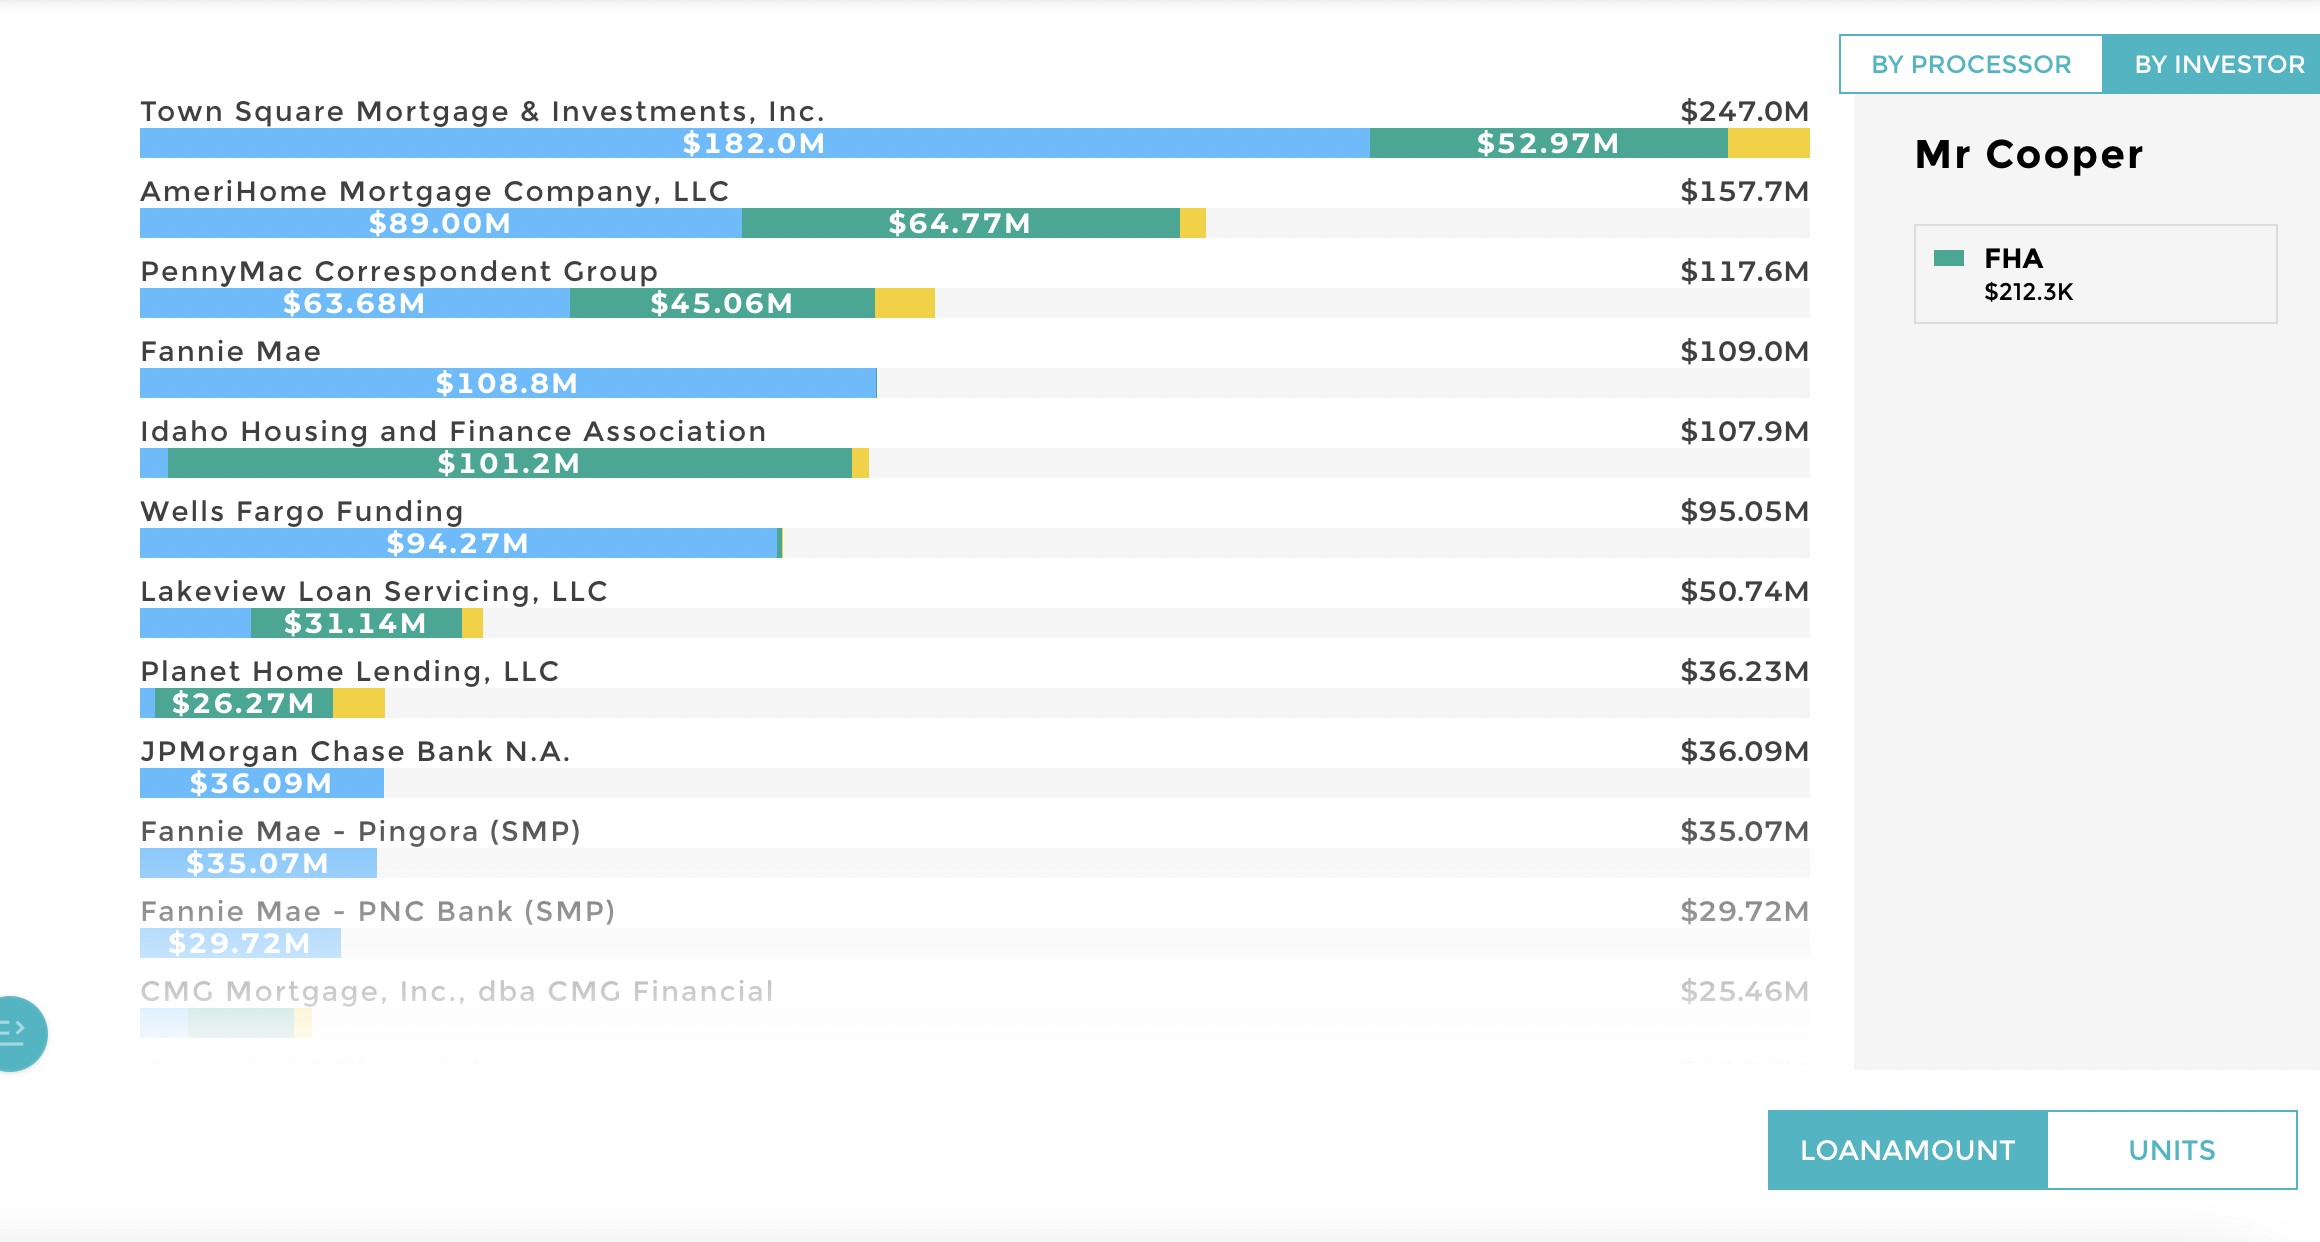 13 Financial dashboard examples based on real companies